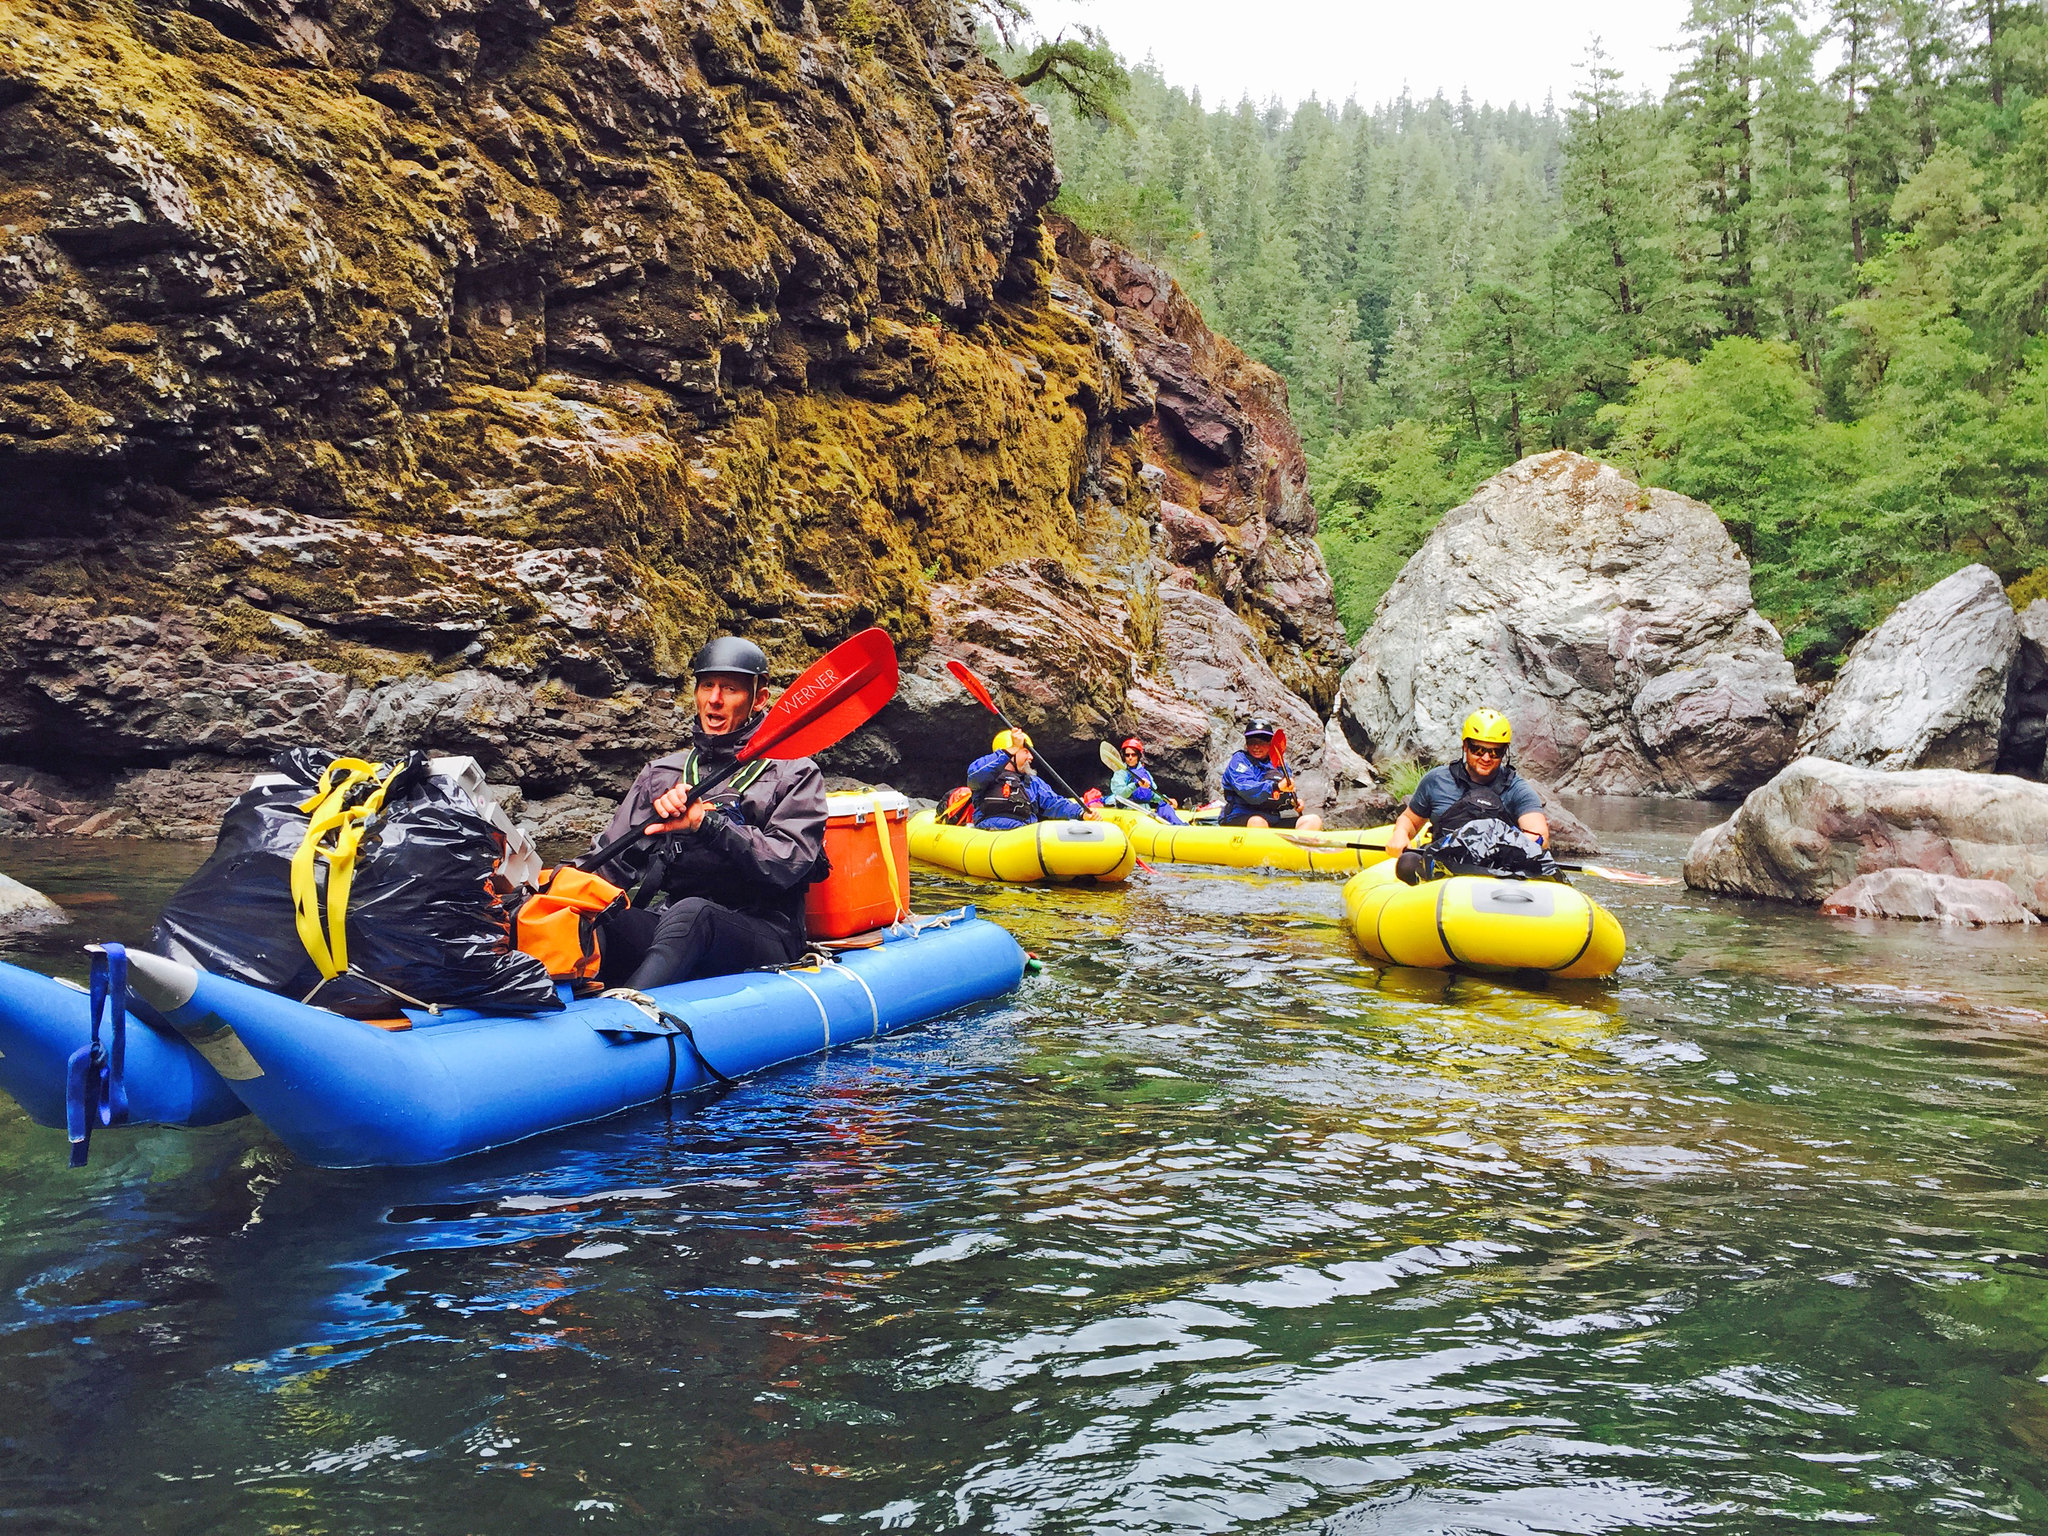 A group of kayakers paddle down a rocky river.